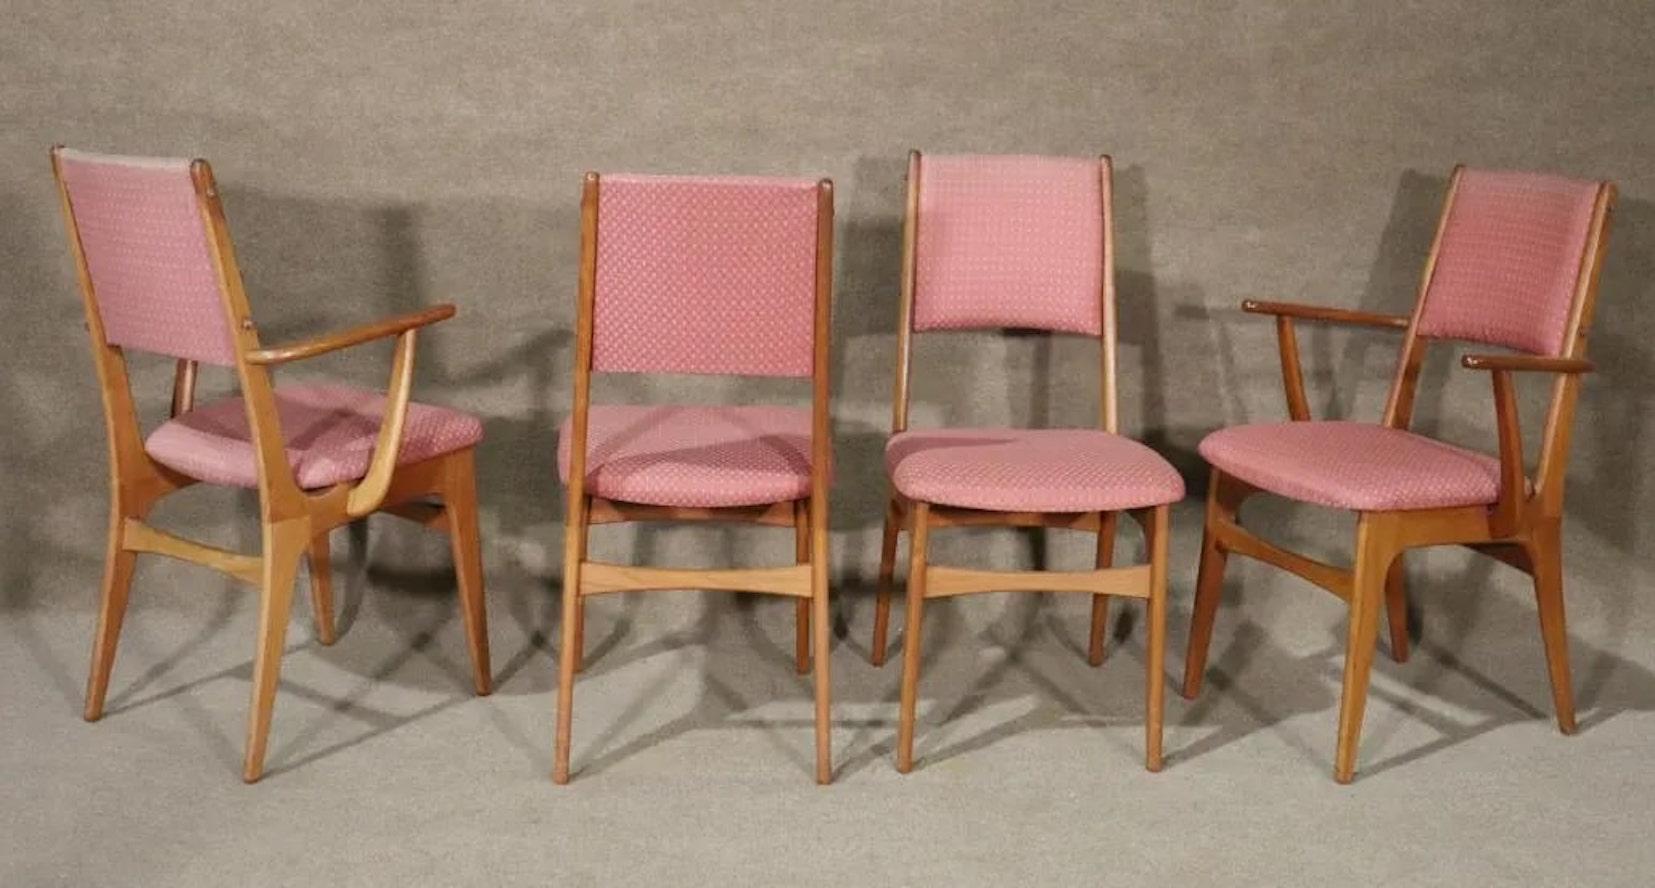 Set of eight dining chairs with teak wood frames. Danish made in the 1960s with simple and handsome design. Two armchairs and six side chairs.
side chairs Measure 36